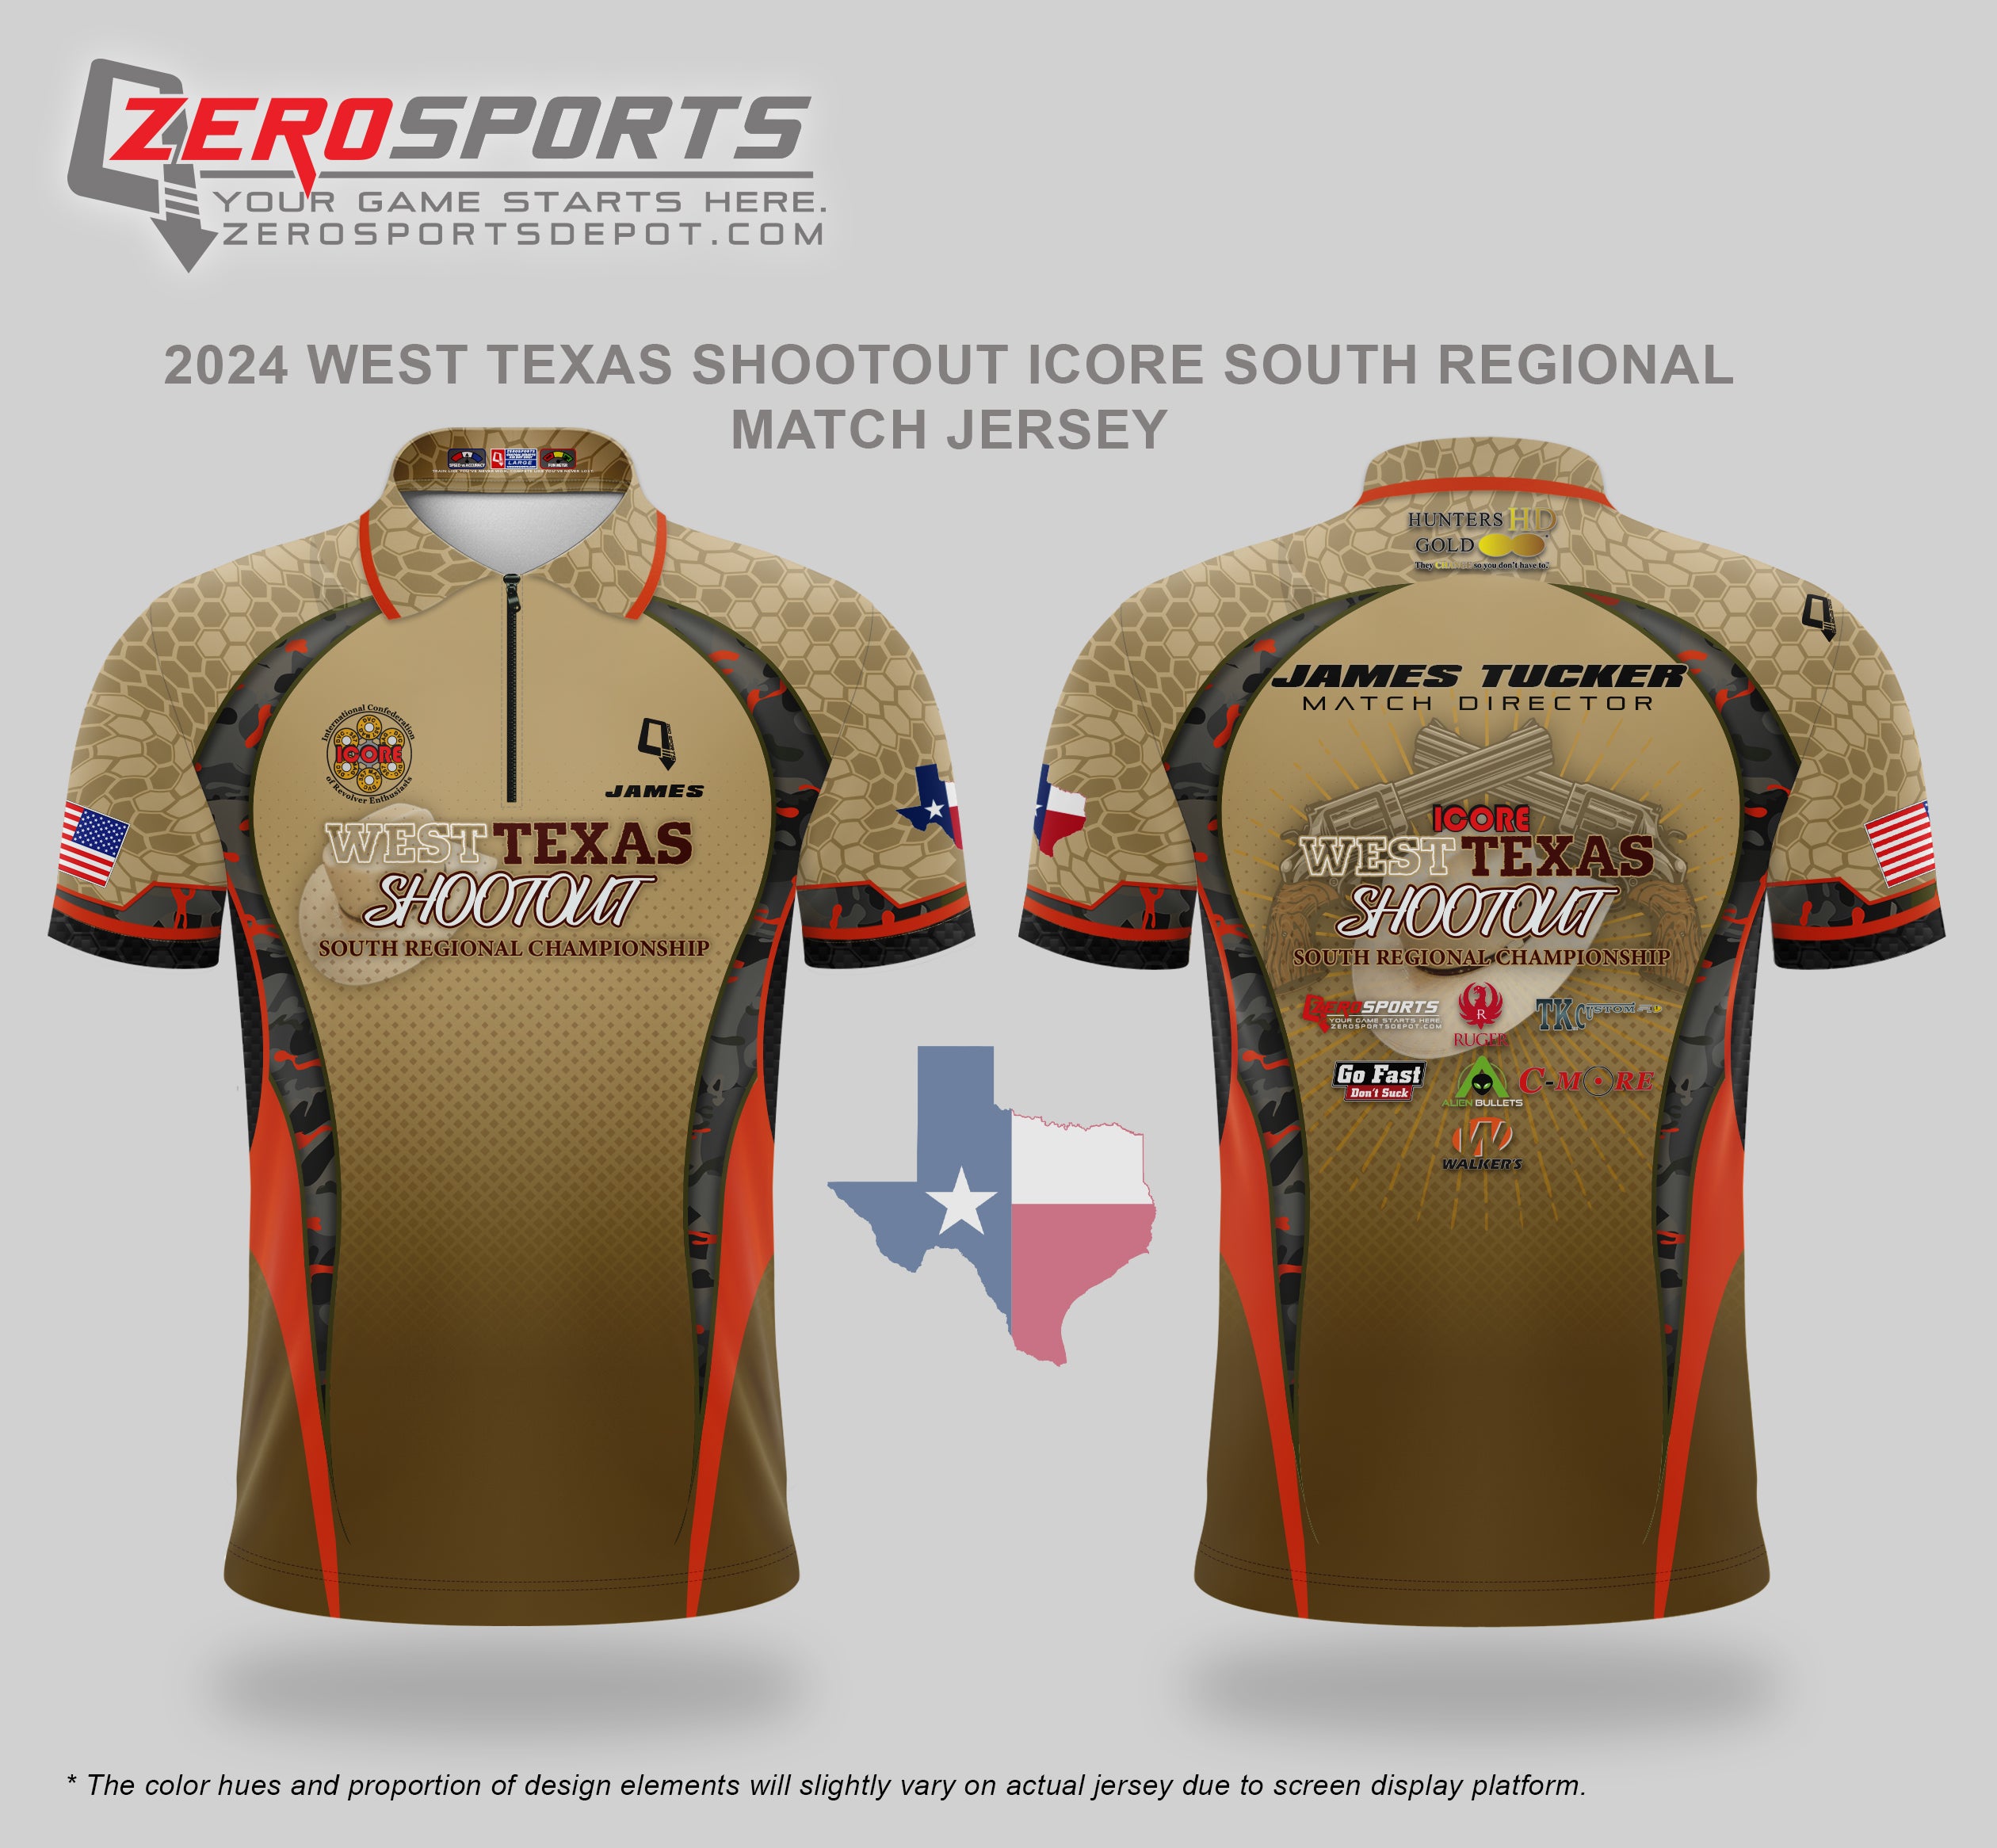 2024 West Texas Shootout ICORE South Regional Championship Match Jersey  **All orders after 3/30/2024 will be shipped directly to your address after the match.